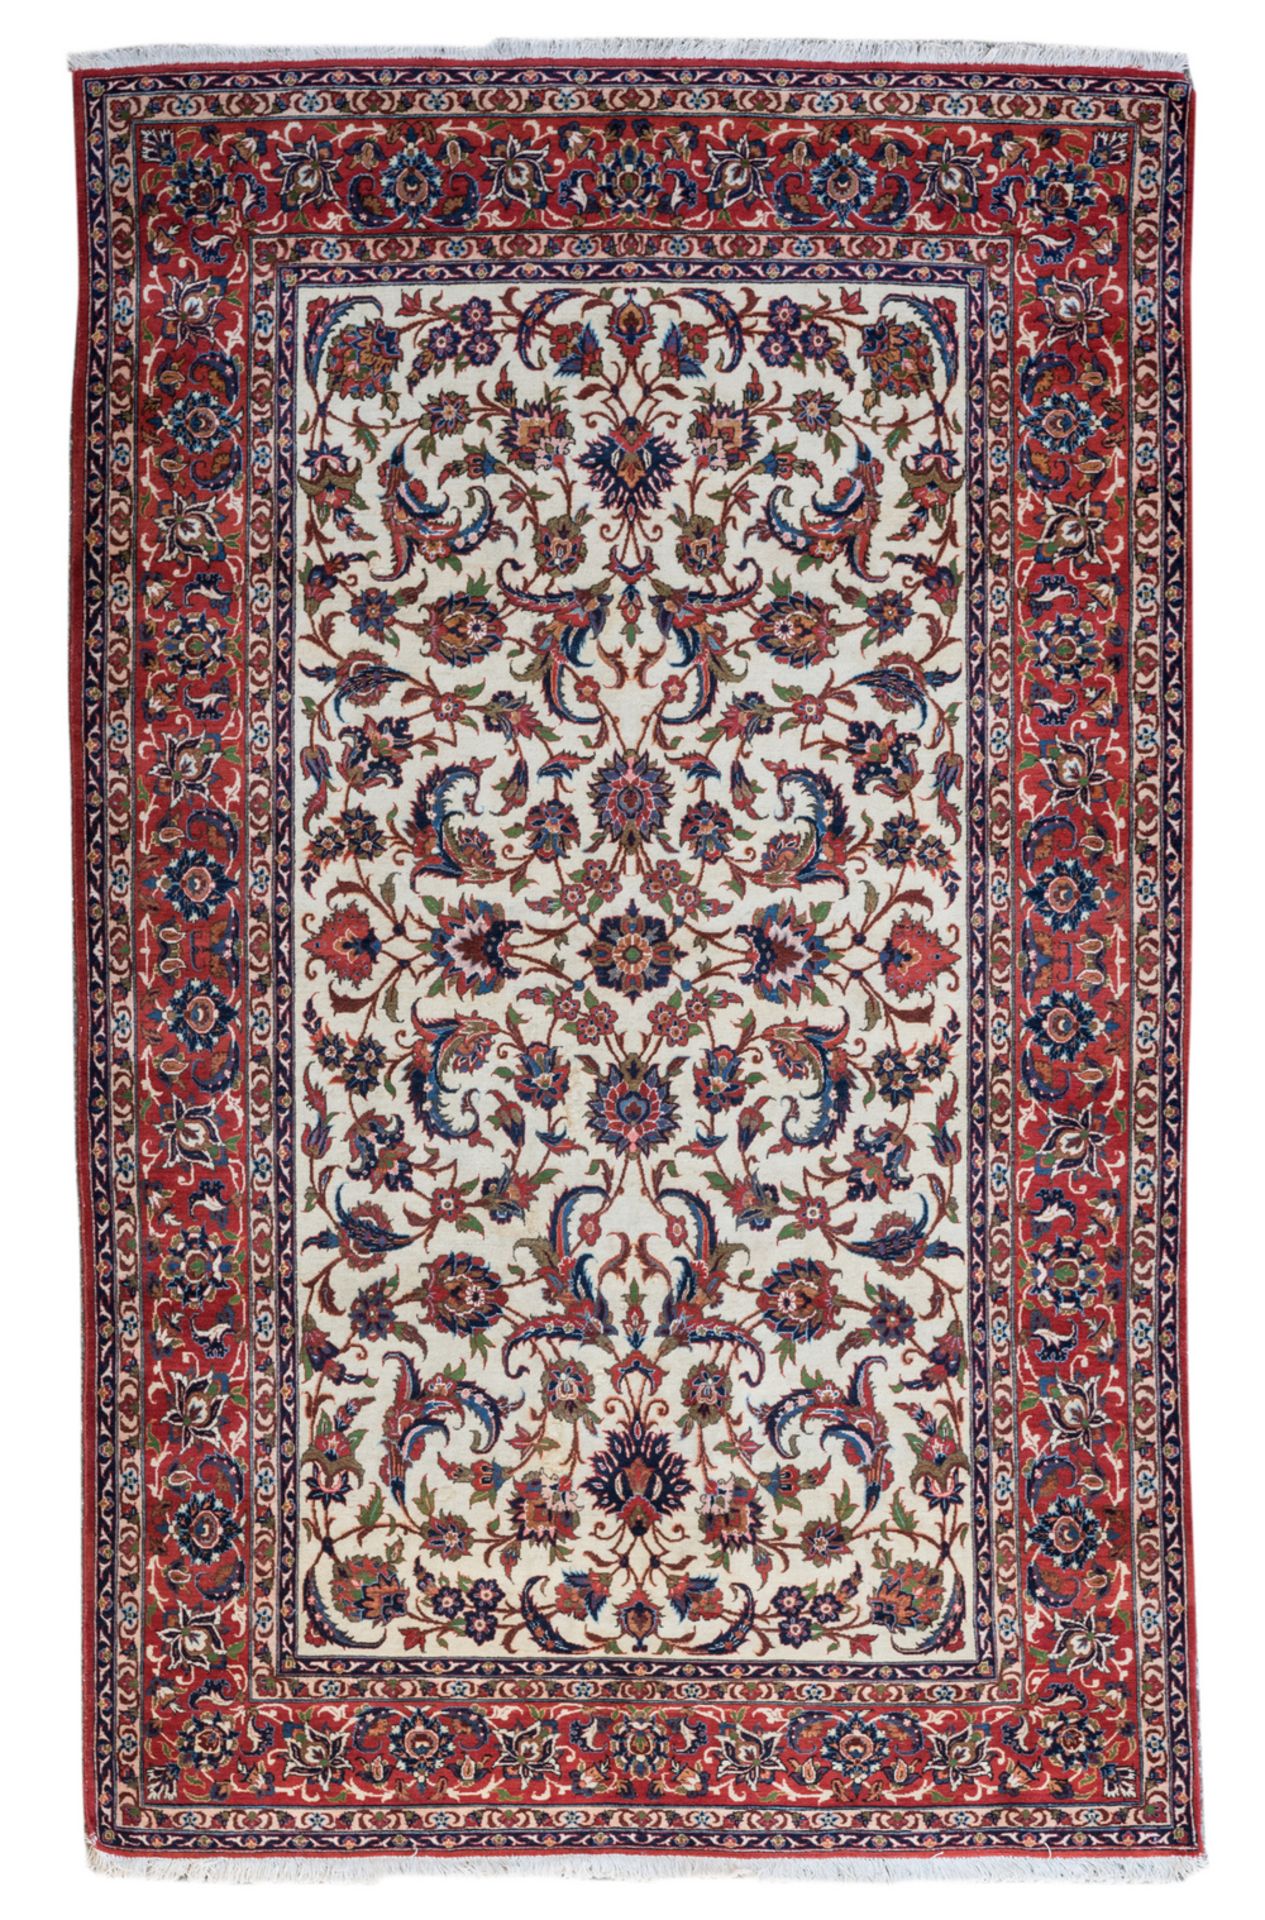 An Oriental rug with floral motifs, wool on cotton, 157 x 270 cm